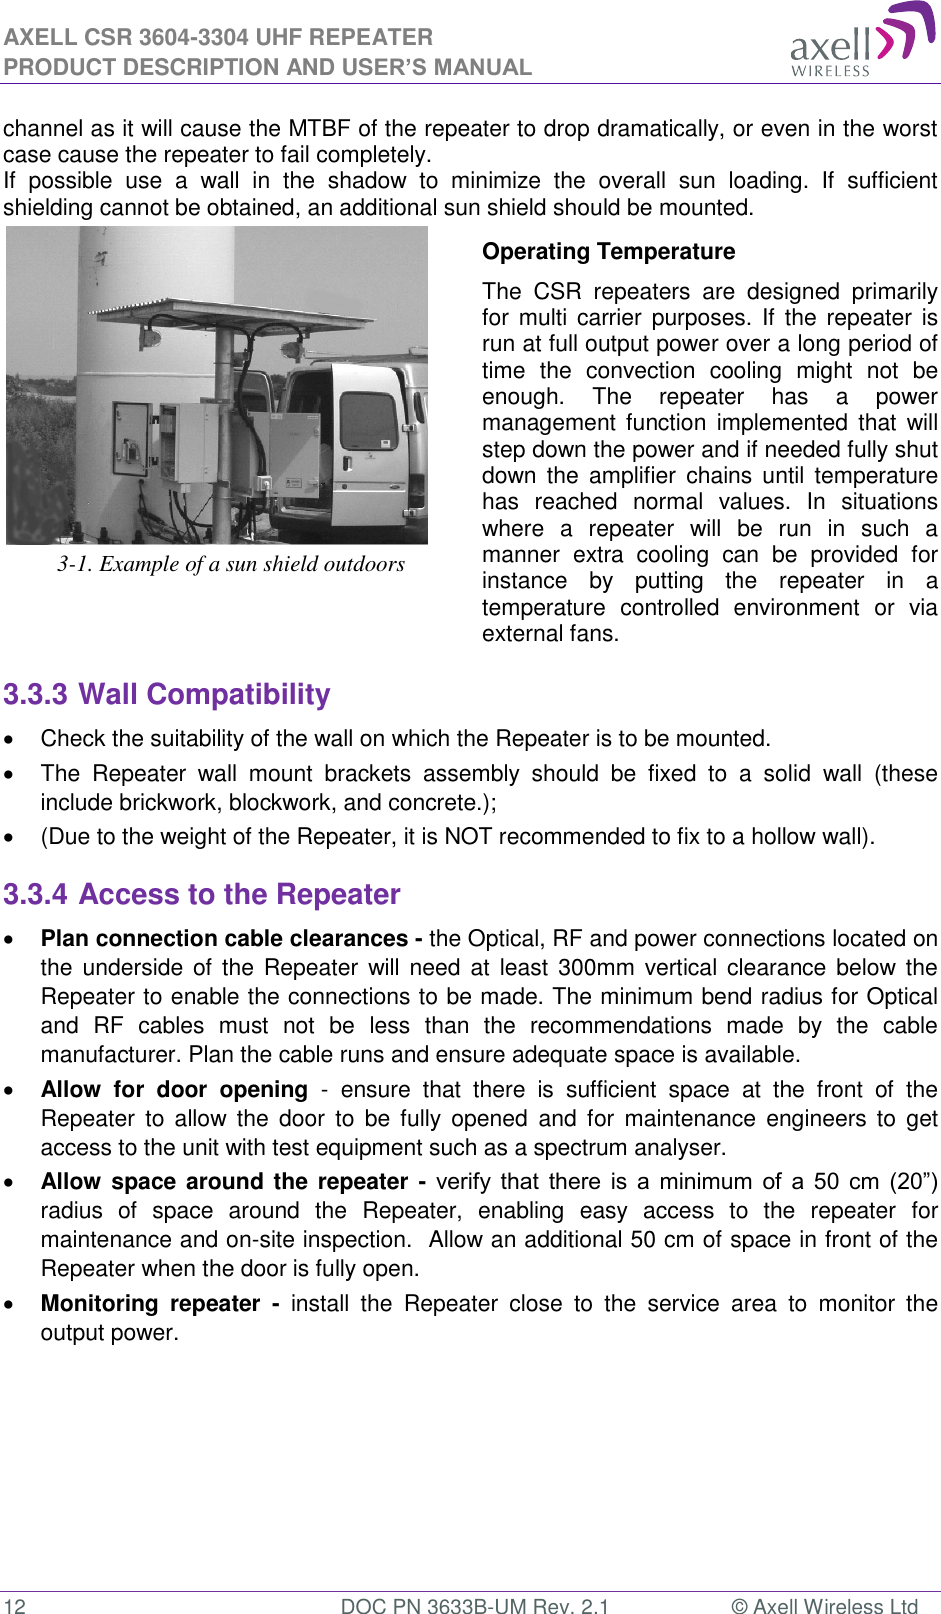 AXELL CSR 3604-3304 UHF REPEATER PRODUCT DESCRIPTION AND USER’S MANUAL  12  DOC PN 3633B-UM Rev. 2.1  © Axell Wireless Ltd  channel as it will cause the MTBF of the repeater to drop dramatically, or even in the worst case cause the repeater to fail completely.  If  possible  use  a  wall  in  the  shadow  to  minimize  the  overall  sun  loading.  If  sufficient shielding cannot be obtained, an additional sun shield should be mounted.   3-1. Example of a sun shield outdoors Operating Temperature The  CSR  repeaters  are  designed  primarily for multi carrier  purposes. If  the  repeater is run at full output power over a long period of time  the  convection  cooling  might  not  be enough.  The  repeater  has  a  power management function  implemented  that  will step down the power and if needed fully shut down the  amplifier  chains  until  temperature has  reached  normal  values.  In  situations where  a  repeater  will  be  run  in  such  a manner  extra  cooling  can  be  provided  for instance  by  putting  the  repeater  in  a temperature  controlled  environment  or  via external fans. 3.3.3 Wall Compatibility   Check the suitability of the wall on which the Repeater is to be mounted.    The  Repeater  wall  mount  brackets  assembly  should  be  fixed  to  a  solid  wall  (these include brickwork, blockwork, and concrete.);    (Due to the weight of the Repeater, it is NOT recommended to fix to a hollow wall). 3.3.4 Access to the Repeater  Plan connection cable clearances - the Optical, RF and power connections located on the  underside of the Repeater  will need  at  least 300mm vertical clearance below the Repeater to enable the connections to be made. The minimum bend radius for Optical and  RF  cables  must  not  be  less  than  the  recommendations  made  by  the  cable manufacturer. Plan the cable runs and ensure adequate space is available.  Allow  for  door  opening  -  ensure  that  there  is  sufficient  space  at  the  front  of  the Repeater  to  allow  the  door  to  be  fully opened  and  for  maintenance  engineers to  get access to the unit with test equipment such as a spectrum analyser.   Allow  space around the repeater - verify  that  there  is  a  minimum  of  a  50  cm  (20”) radius  of  space  around  the  Repeater,  enabling  easy  access  to  the  repeater  for maintenance and on-site inspection.  Allow an additional 50 cm of space in front of the Repeater when the door is fully open.  Monitoring  repeater  -  install  the  Repeater  close  to  the  service  area  to  monitor  the output power.  